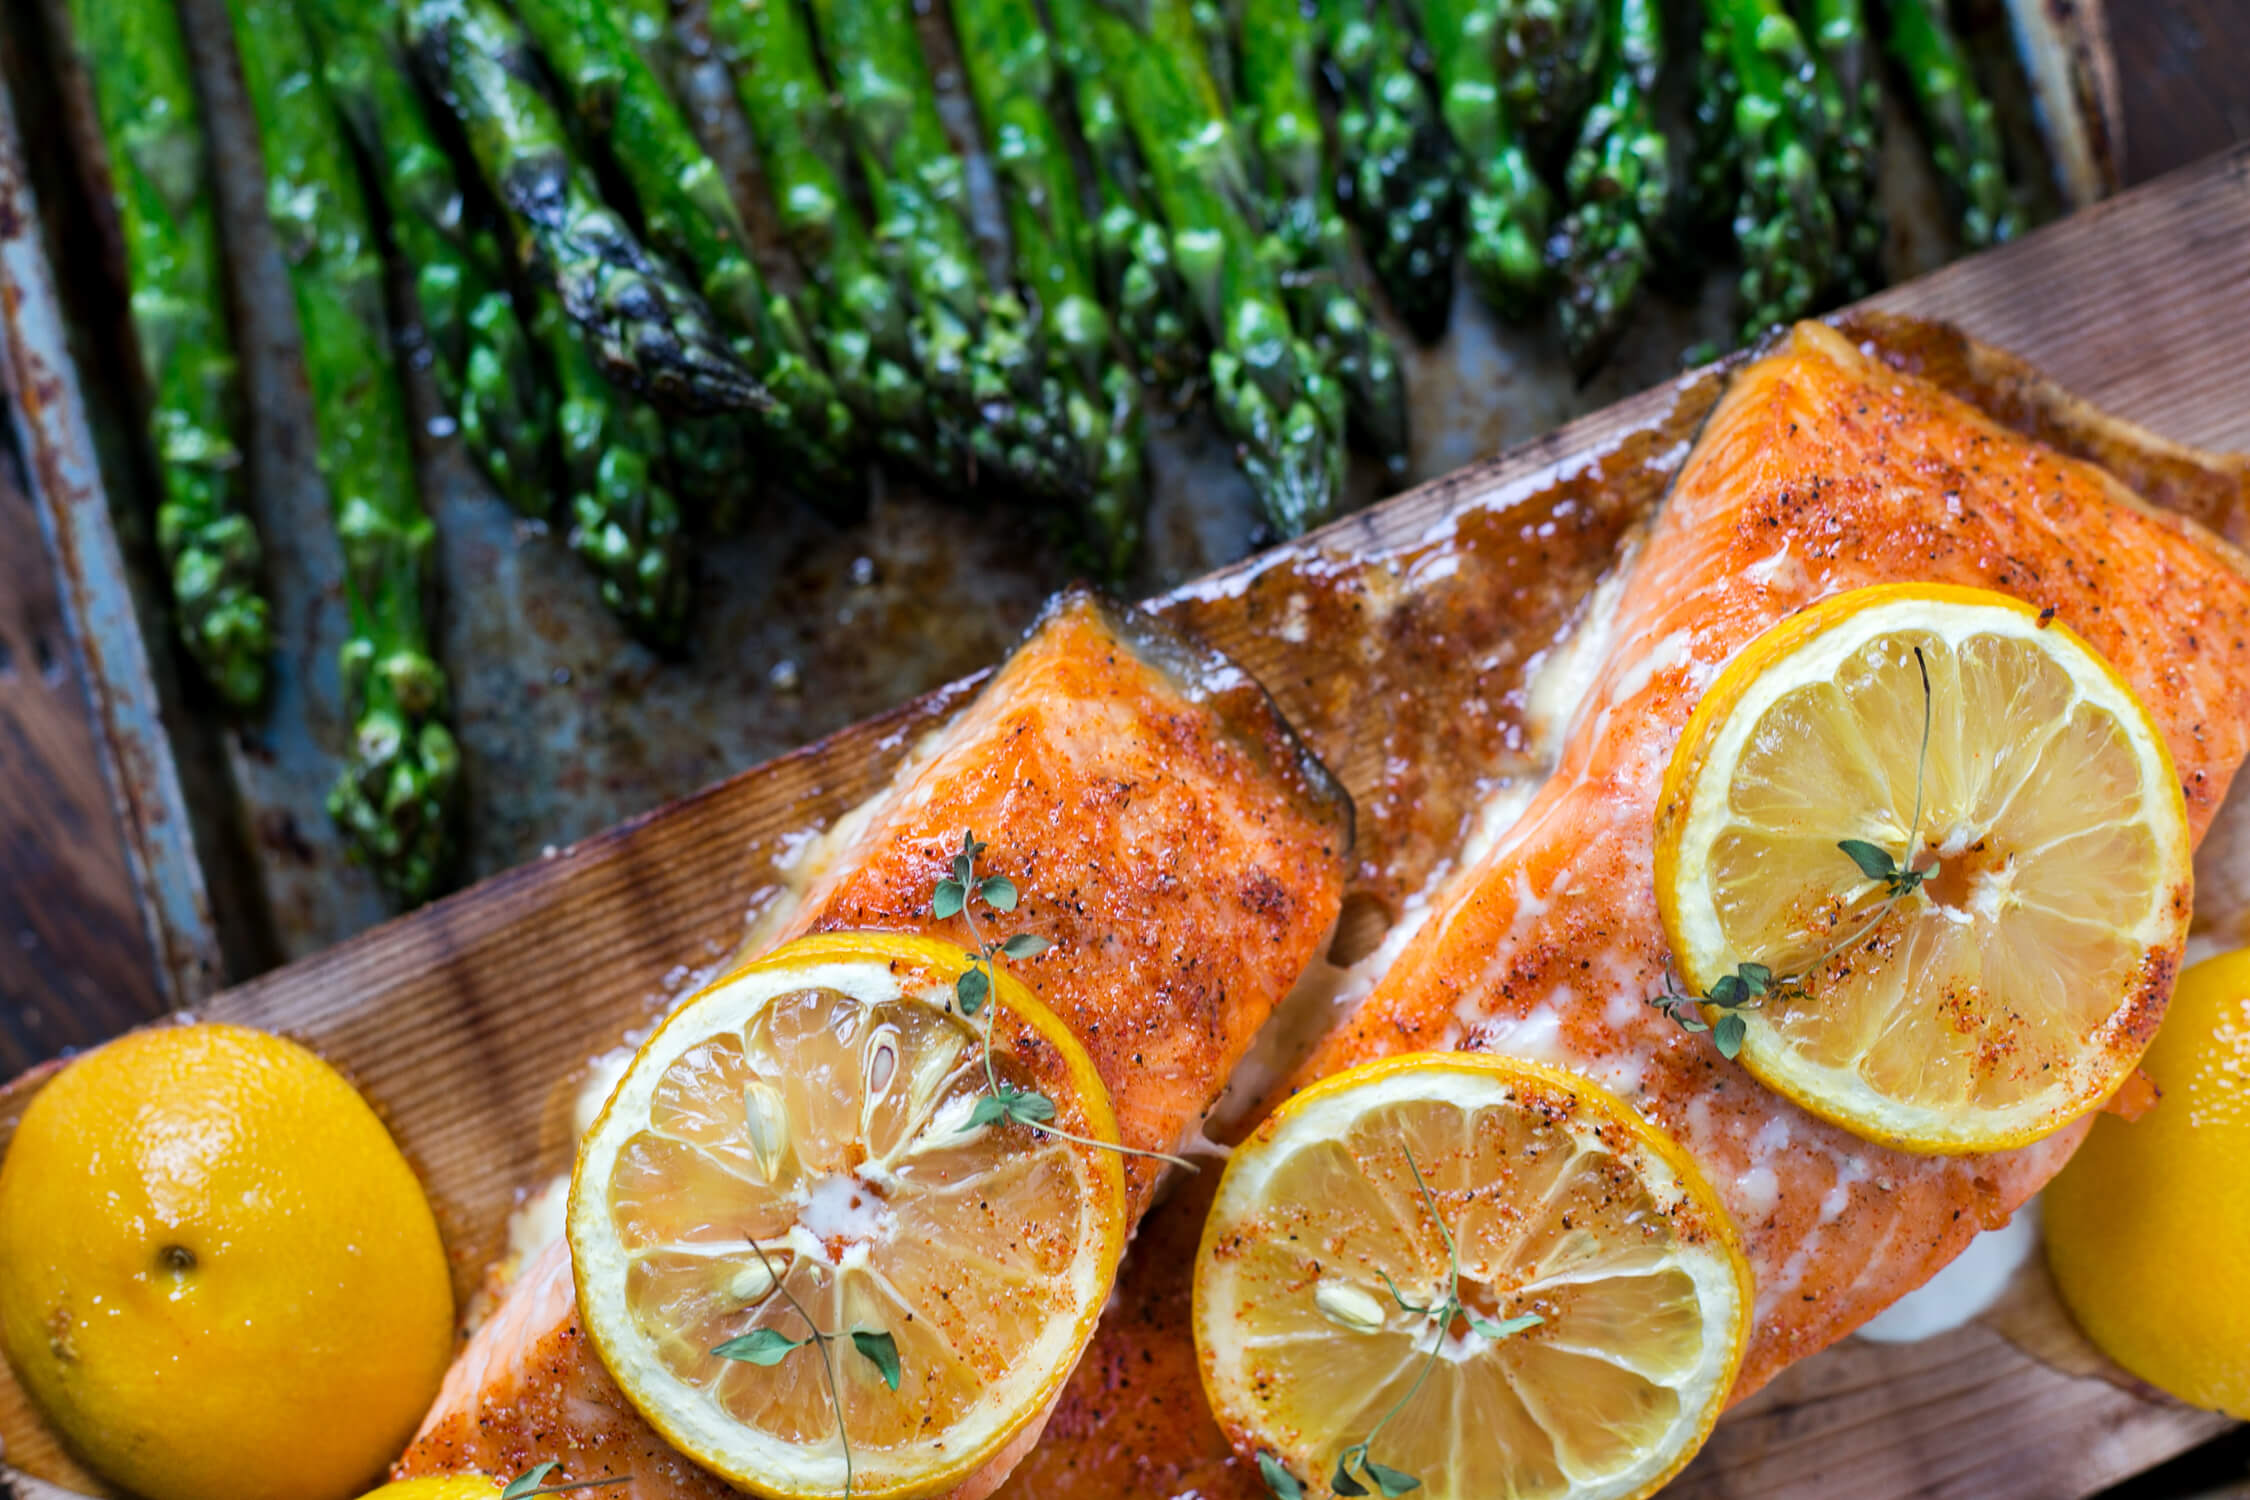 20 Meal Ideas Your Clients Can Grill This Summer: Cedar Planked Salmon with Grilled Asparagus